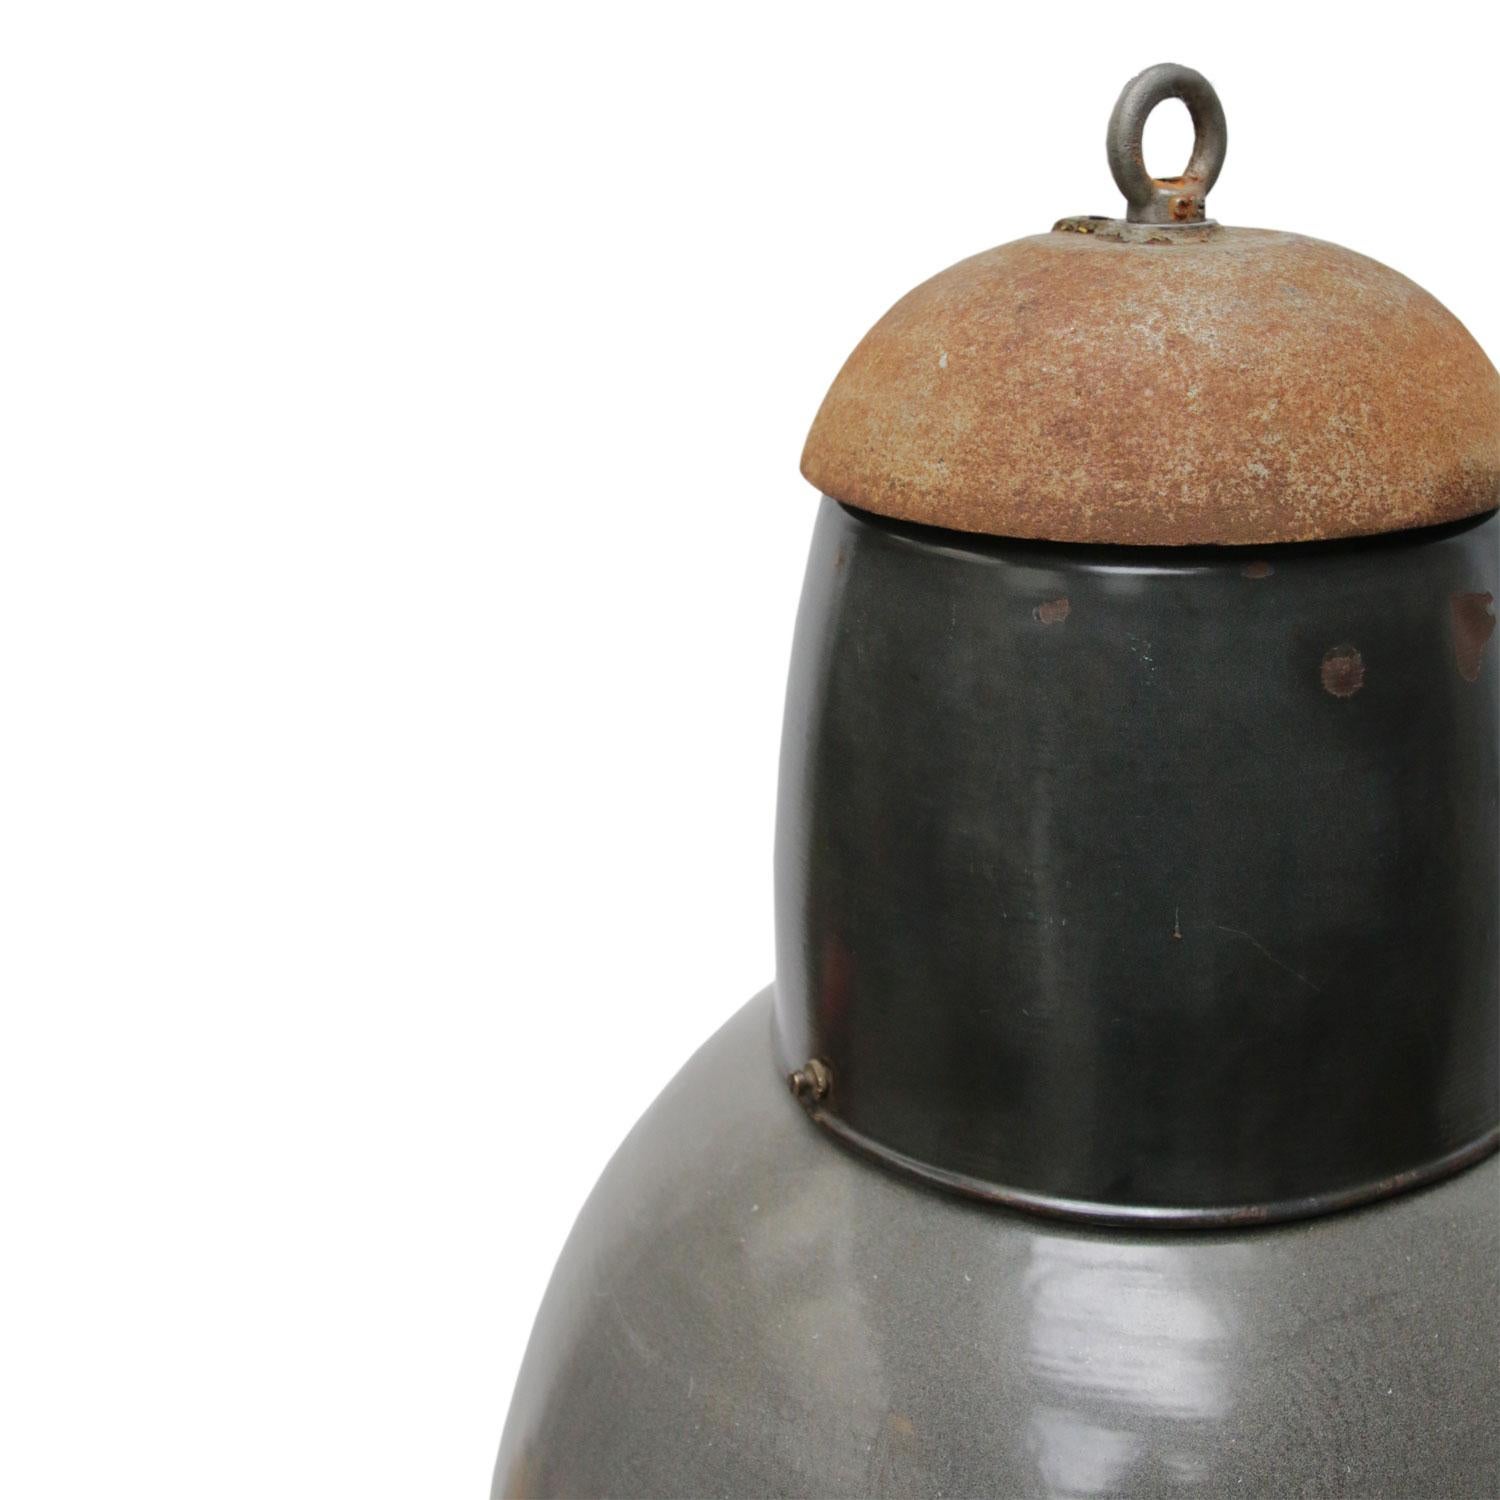 Grey enamel industrial pendant. Nicely aged coloring in patina.
White interior.

Weight: 7.5 kg / 16.5 lb.

Priced per individual item. All lamps have been made suitable by international standards for incandescent light bulbs, energy-efficient and